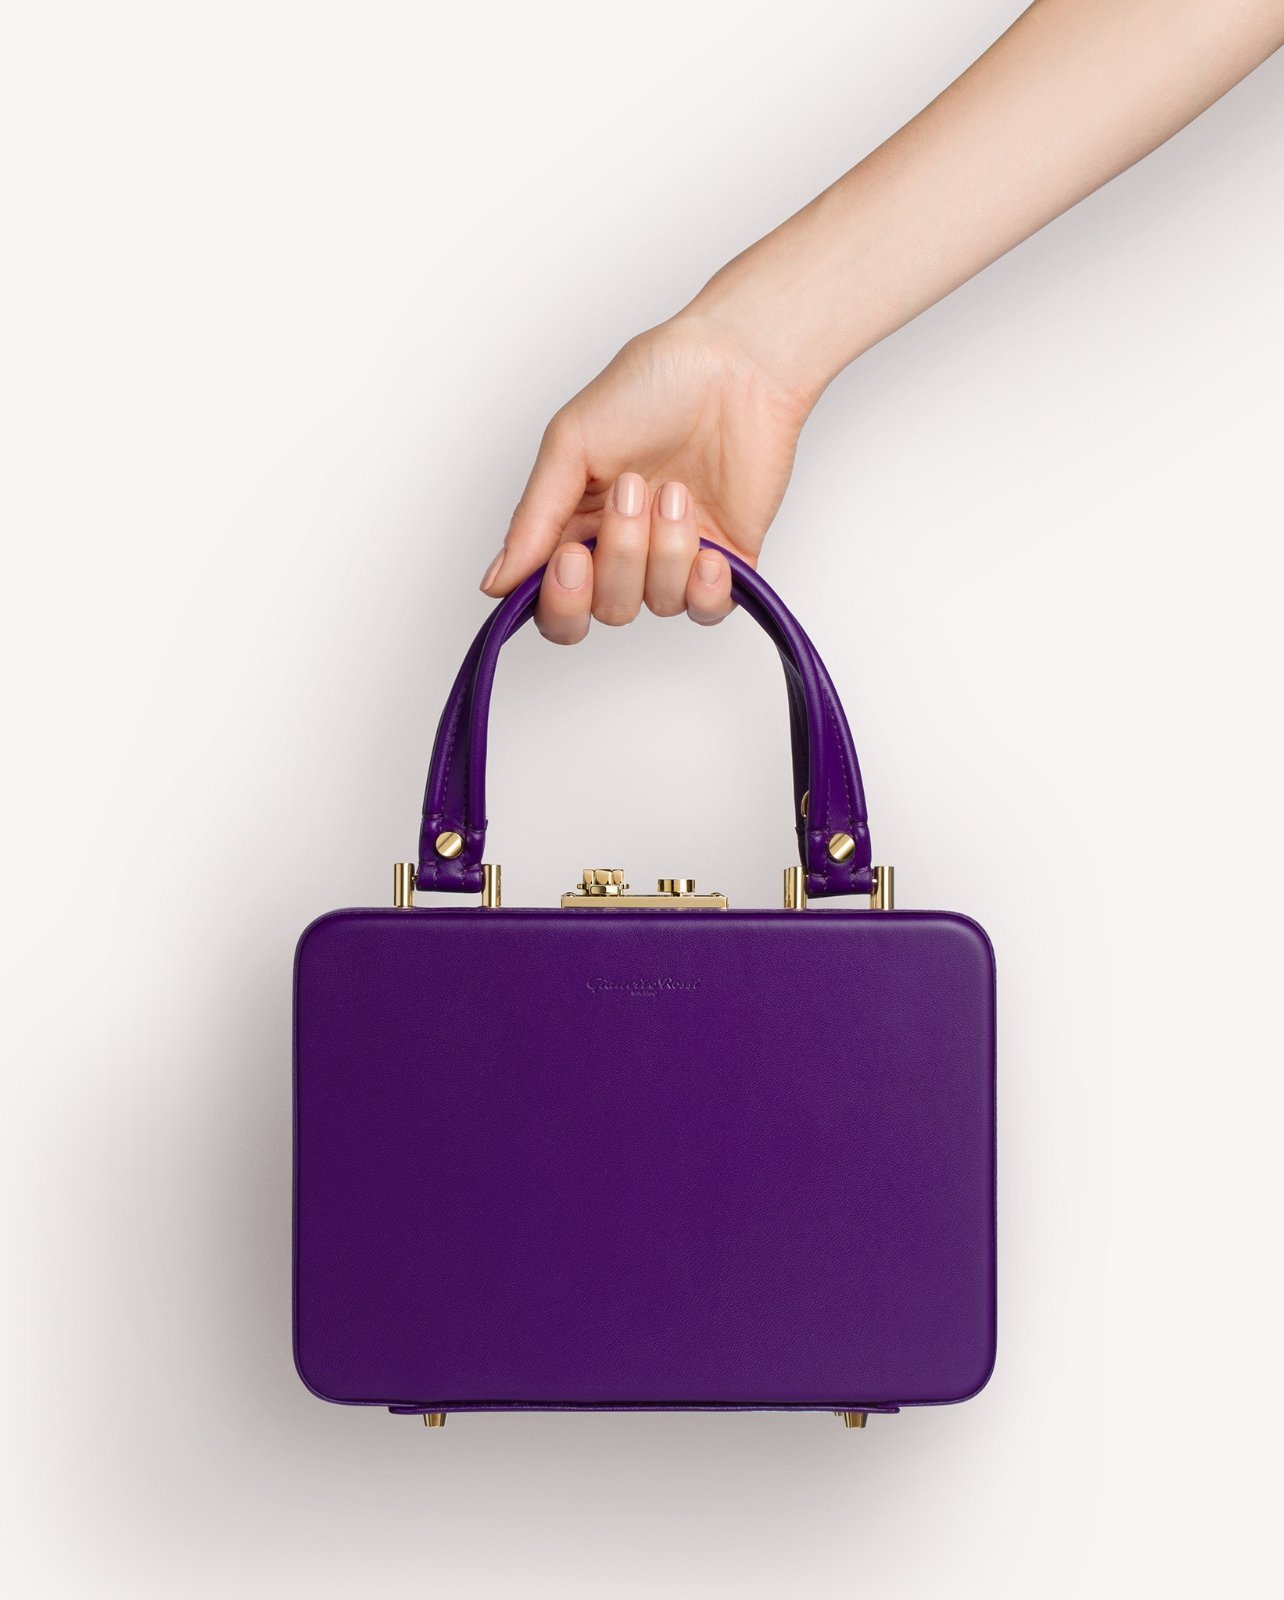 Image of model carrying the new Gianvito Rossi Valì bag in purple